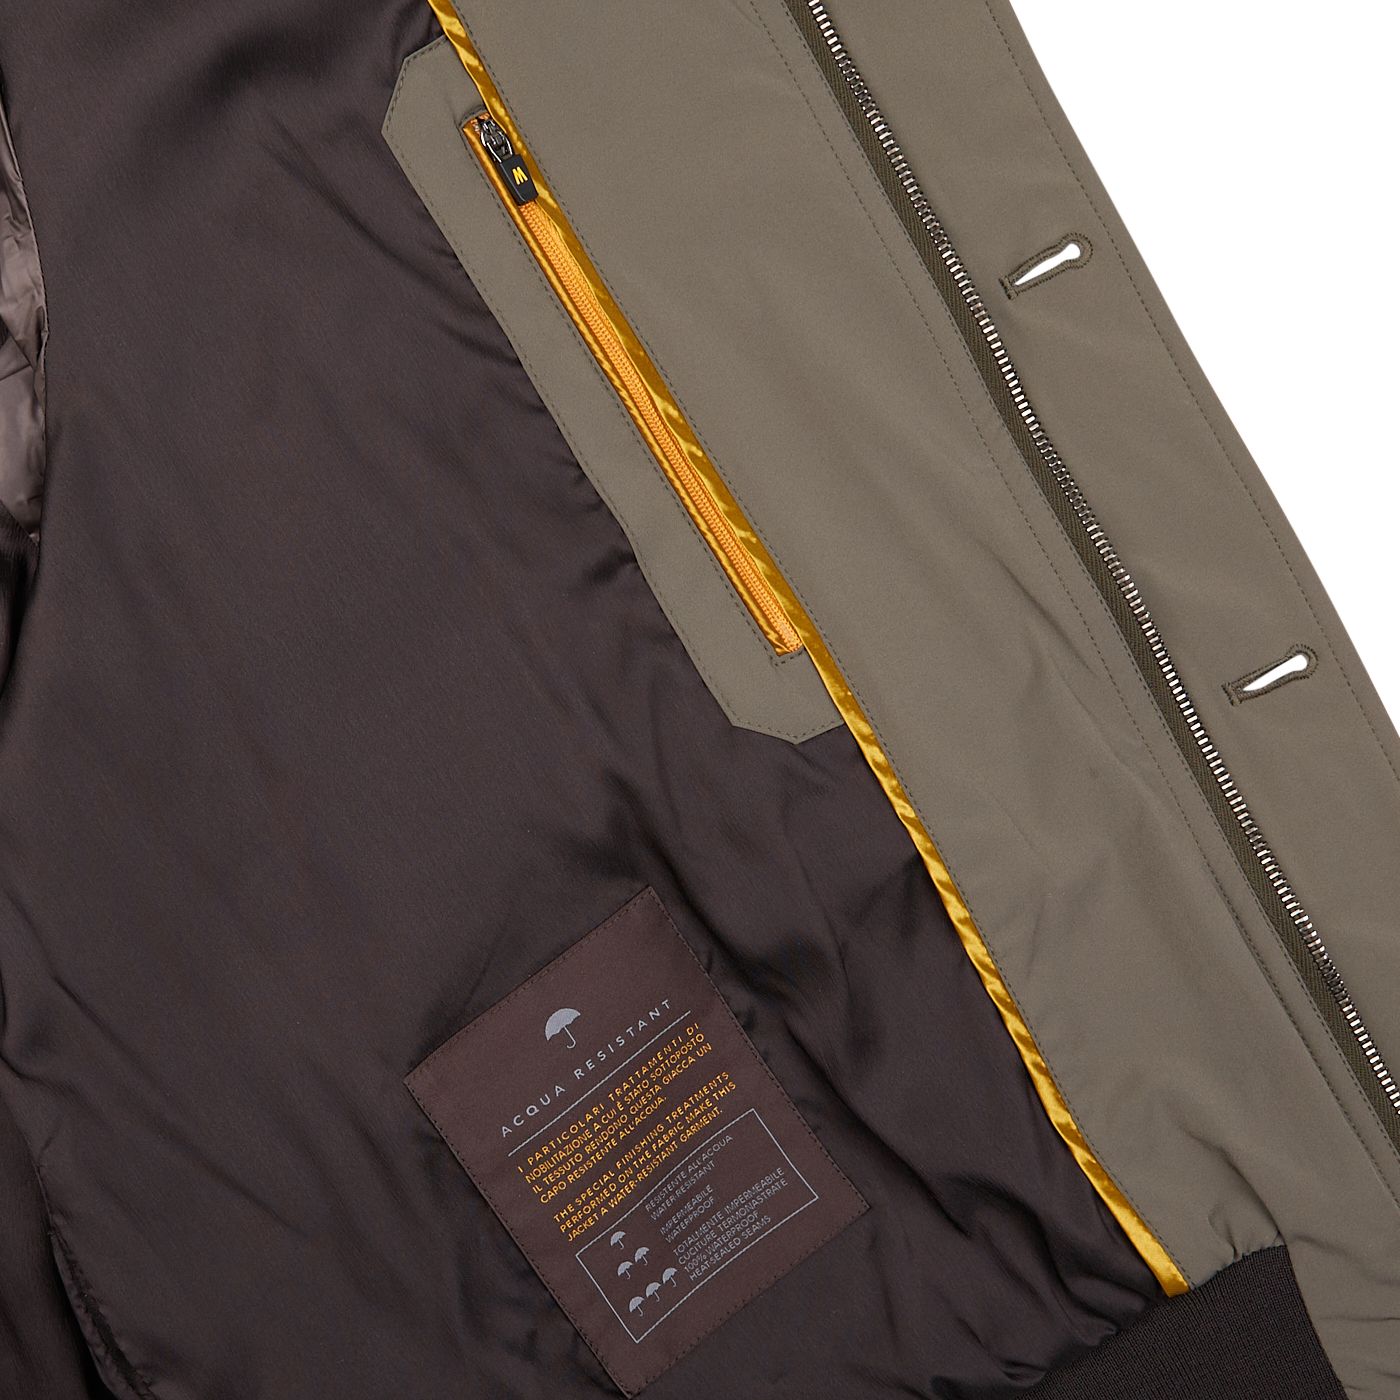 Close-up of a partially unzipped Moorer Olive Green Technical Nylon Blouson, made of wind-resistant technical nylon, with a yellow inner lining and a care label visible.